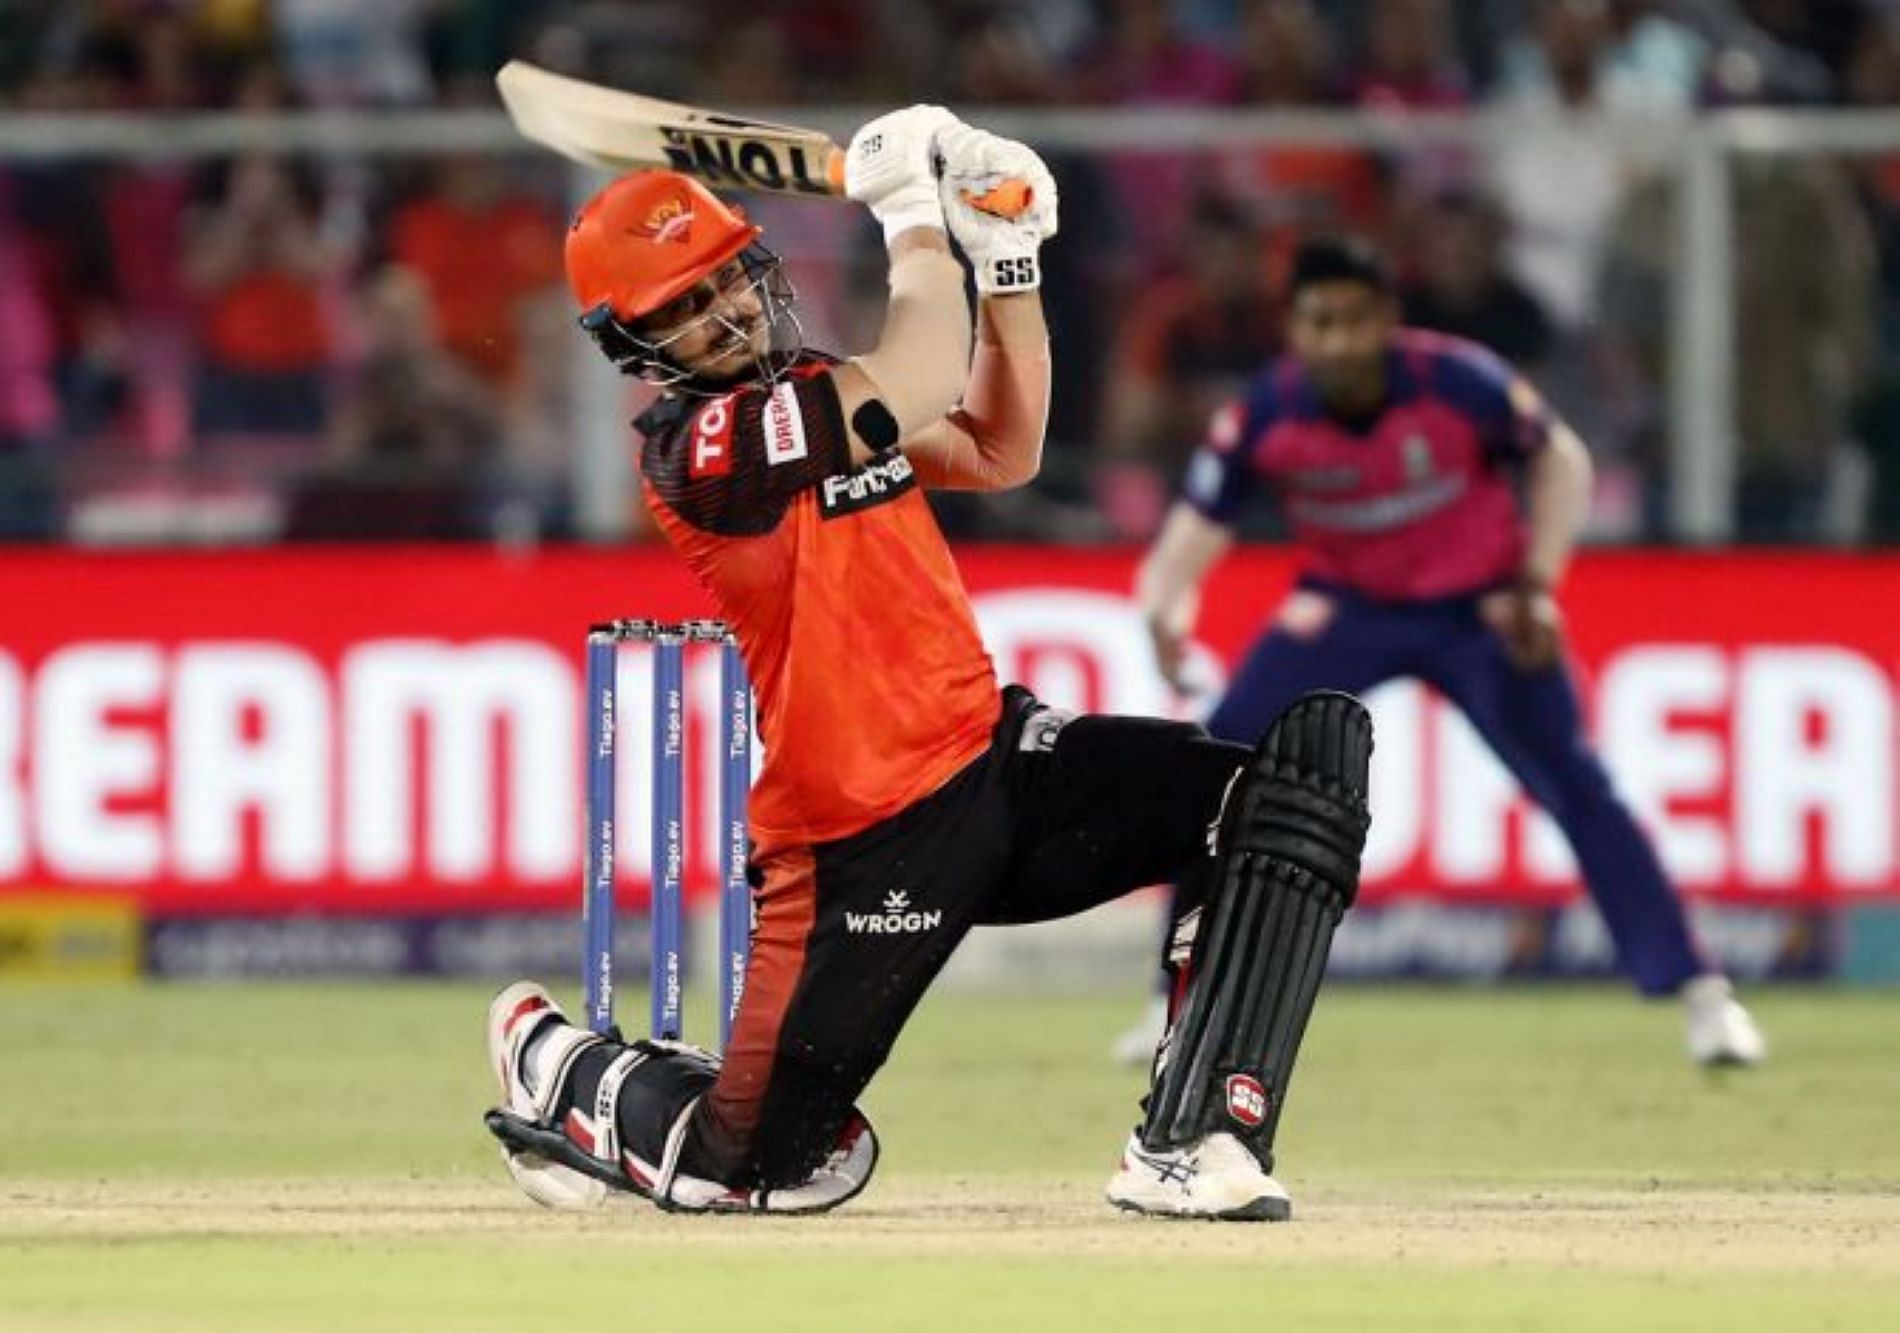 Samad's explosive batting could help SRH win close games.